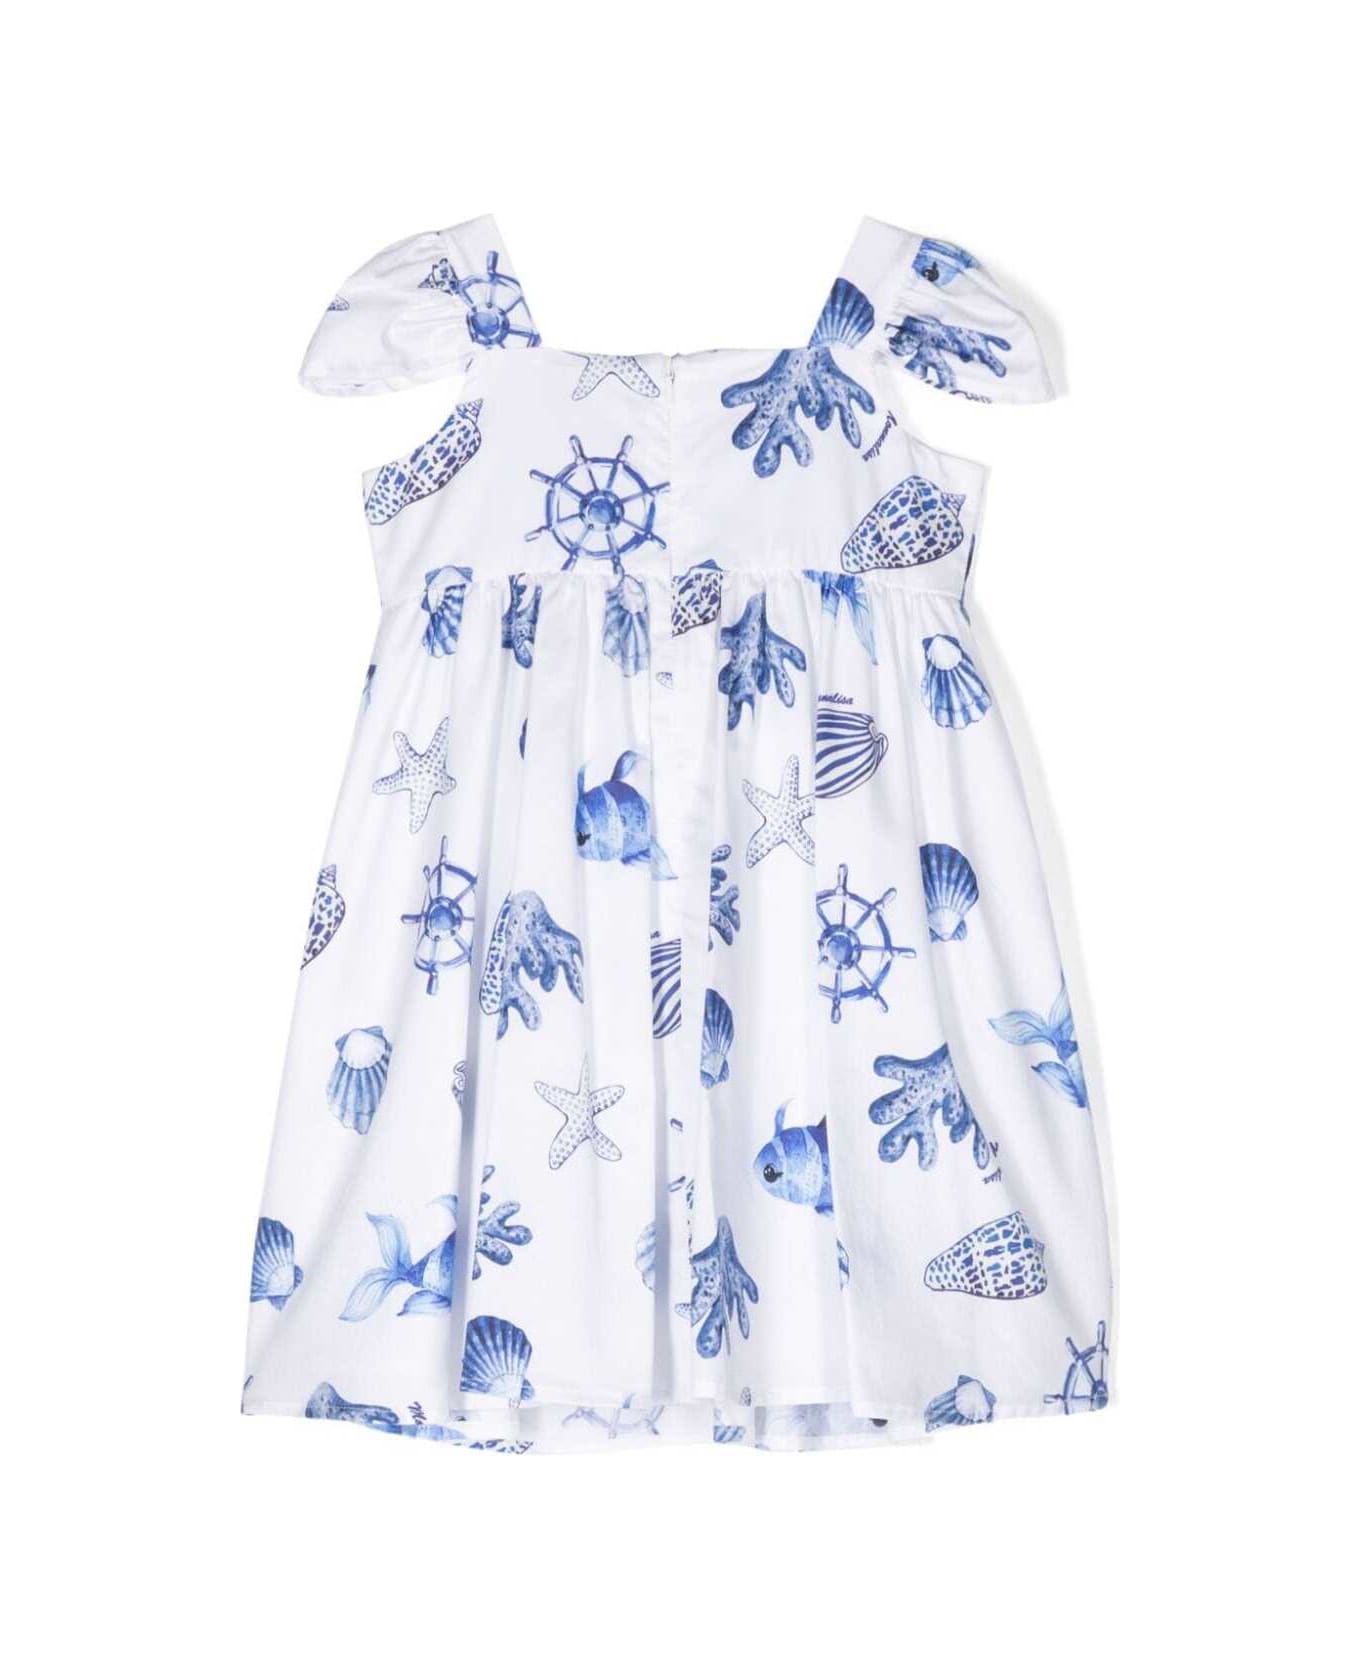 Monnalisa White And Blue Dress With Straps And Marine Print In Cotton Girl - Multicolor ワンピース＆ドレス